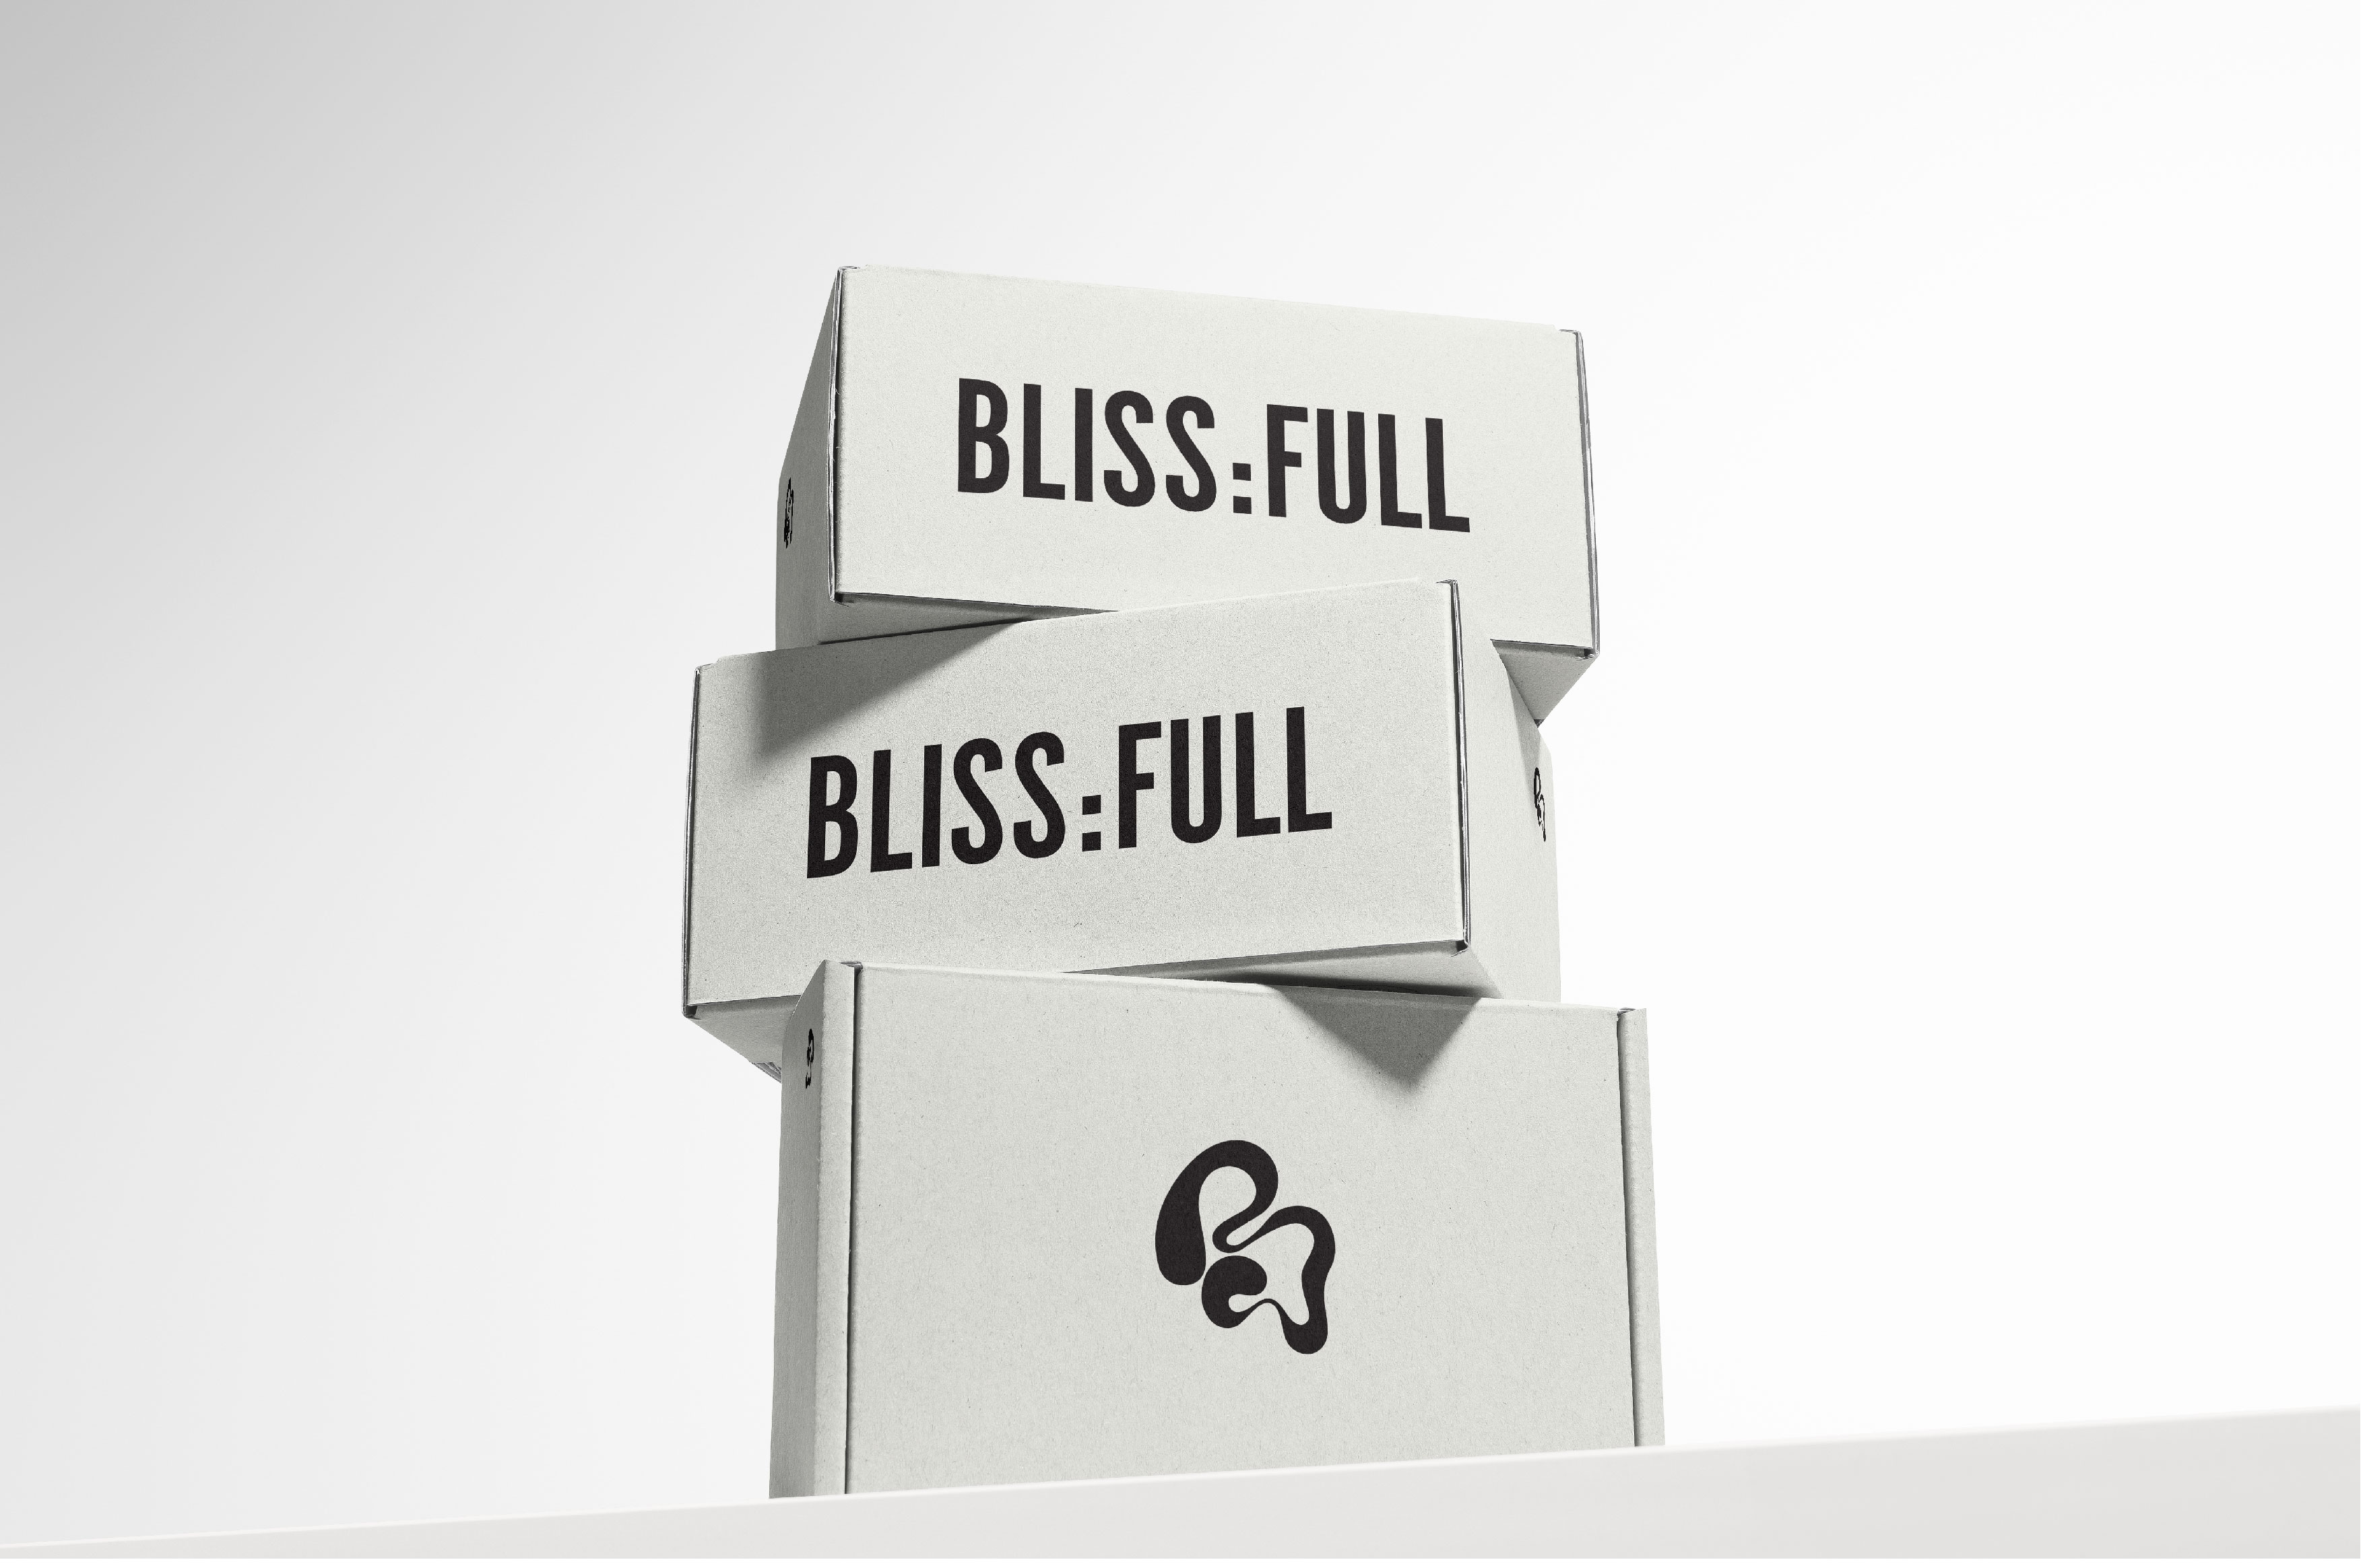 Bliss:full Bakery Unveils Modern Packaging – Where Minimalism Meets Delectable Treats